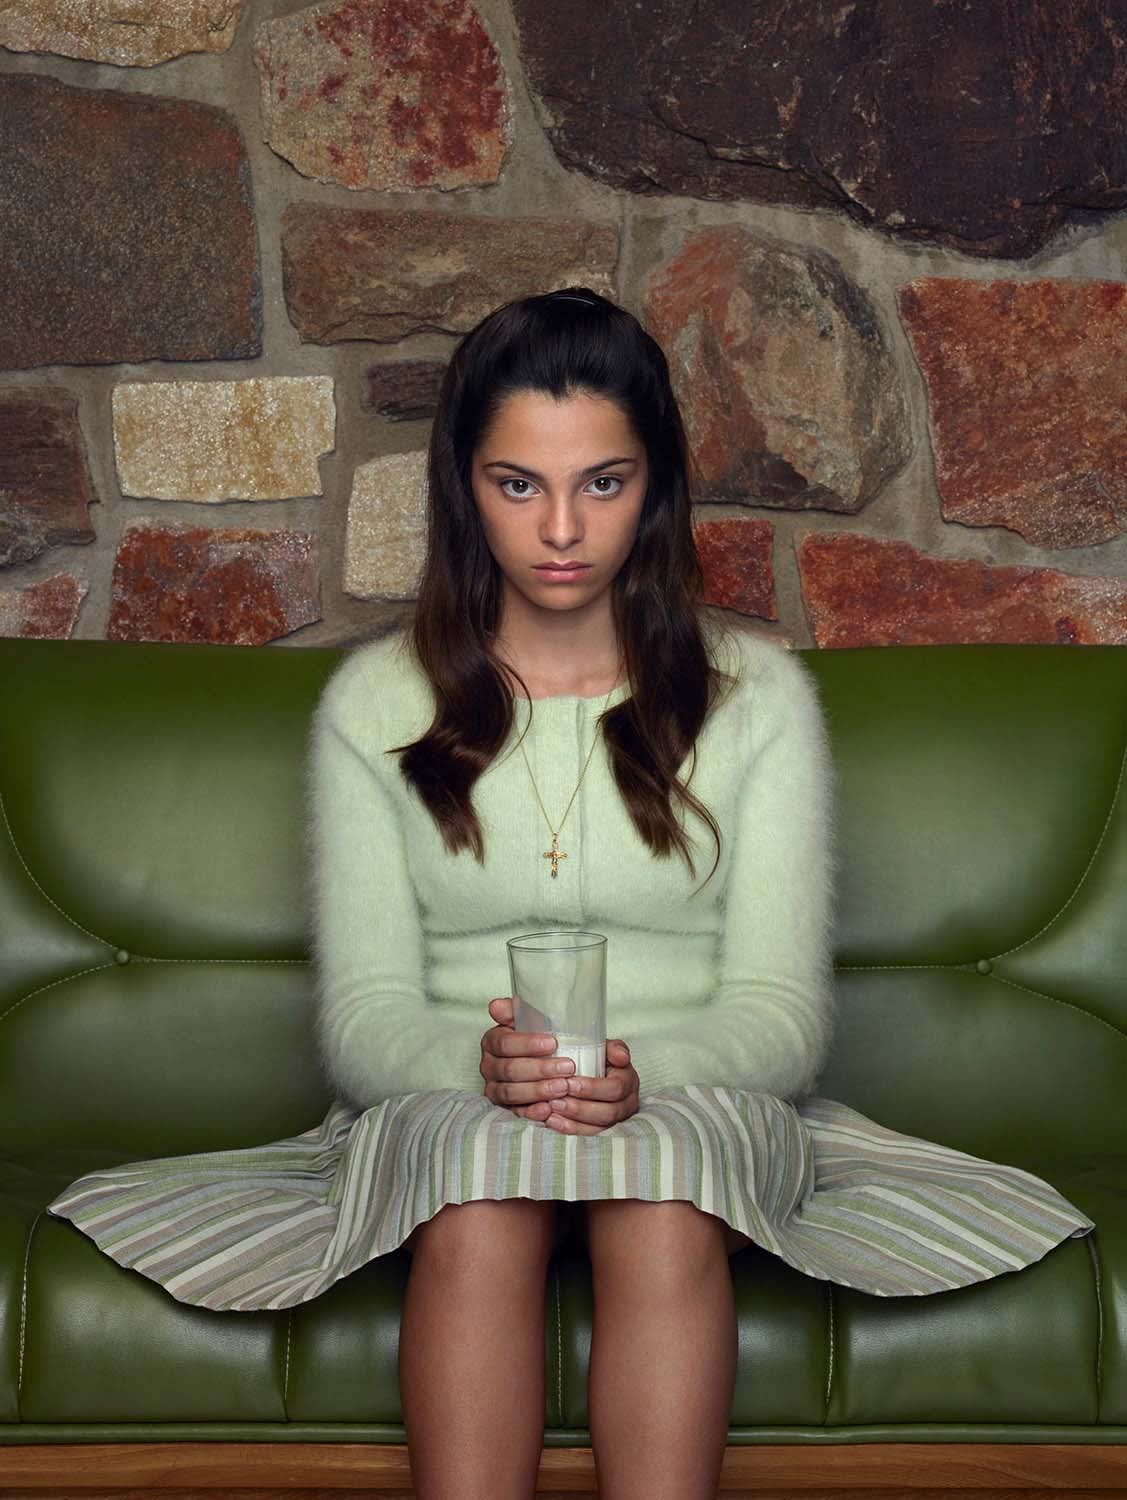 Young girl niece sitting on green couch, holding a glass of milk, from Palm Springs midcentury series, by Erwin Olaf